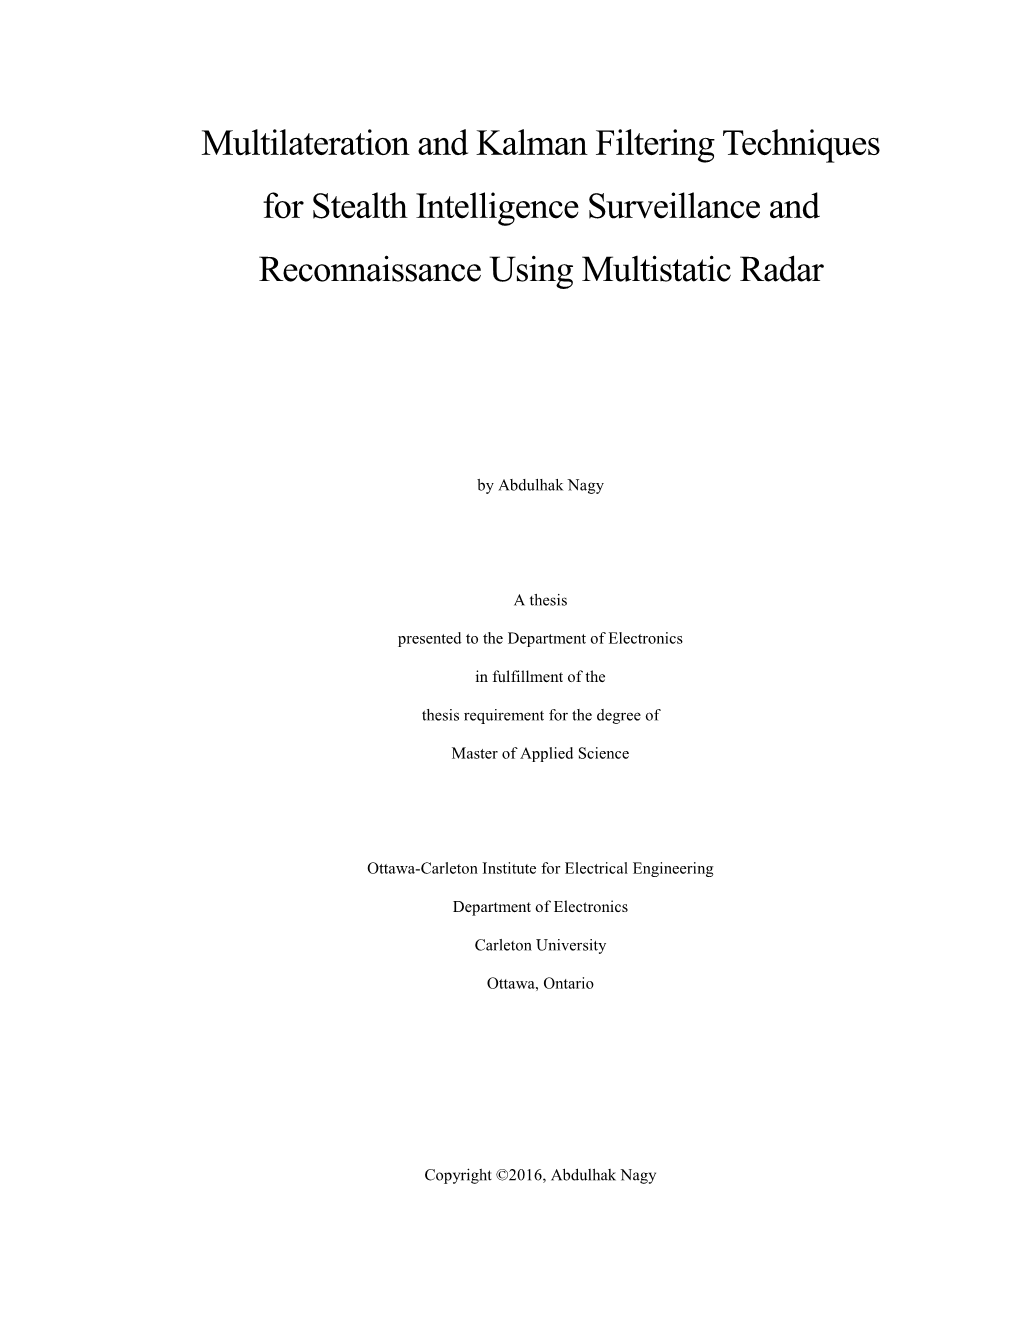 Multilateration and Kalman Filtering Techniques for Stealth Intelligence Surveillance and Reconnaissance Using Multistatic Radar